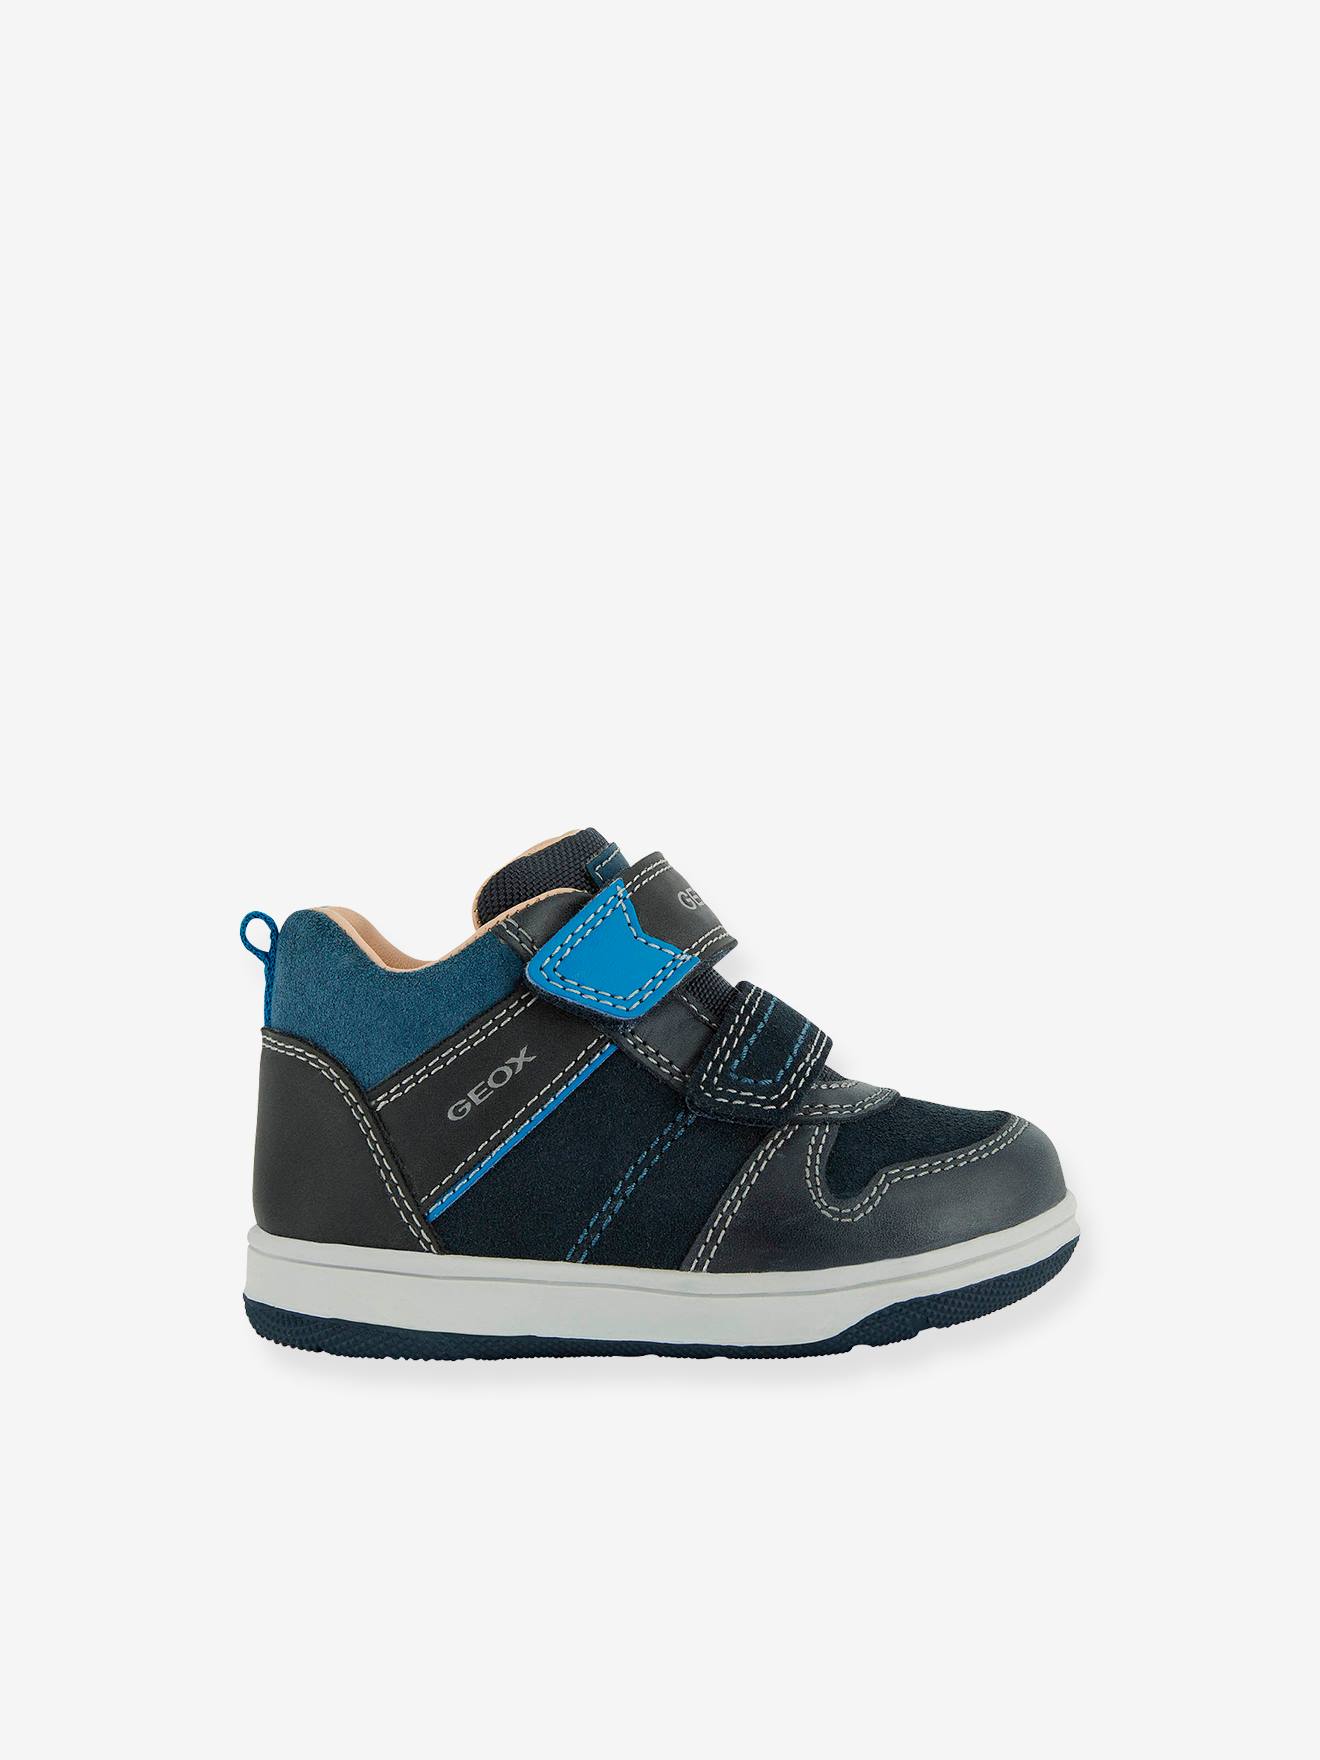 High Top Trainers for Baby, New Boy by GEOX®, Shoes